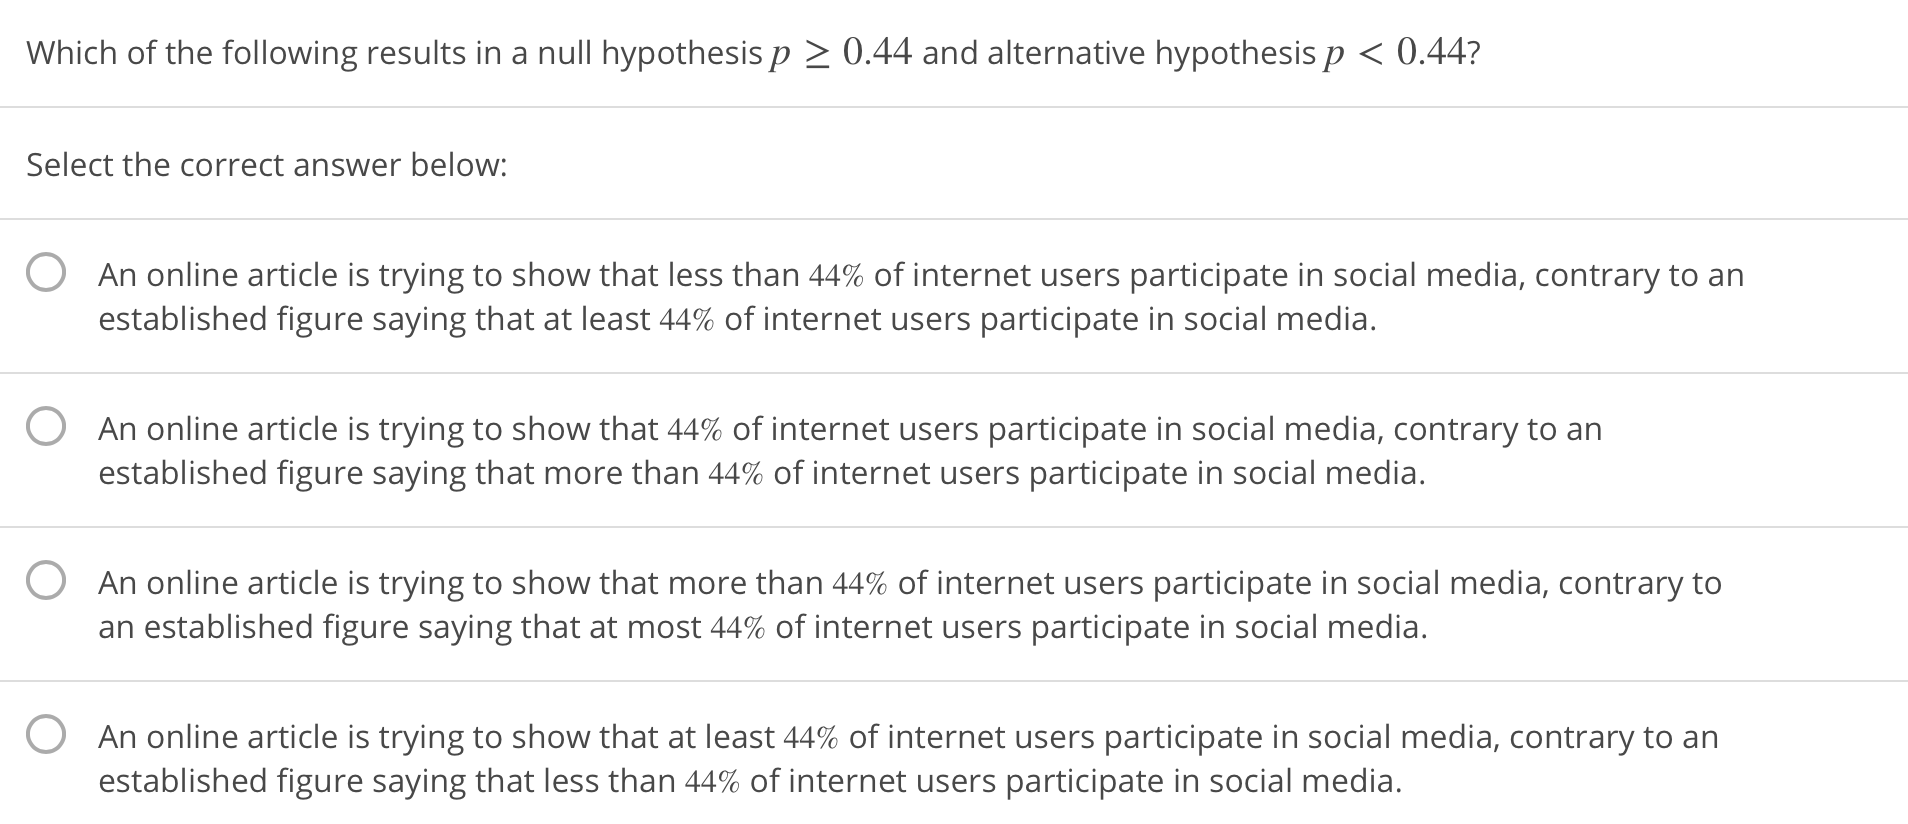 Which of the following results in a null hypothesis P Ž 0.44 and alternative hypothesis P 〈 0.44?
Select the correct answer below:
O
An online article is trying to show that less than 44% of internet users participate in social media, contrary to an
established figure saying that at least 44% of internet users participate in social media
O
An online article is trying to show that 44% of internet users participate in social media, contrary to an
established figure saying that more than 44% of internet users participate in social media.
O
An online article is trying to show that more than 44% of internet users participate in social media, contrary to
an established figure saying that at most 44% of internet users participate in social media.
O
An online article is trying to show that at least 44% of internet users participate in social media, contrary to an
established figure saying that less than 44% of internet users participate in social media
